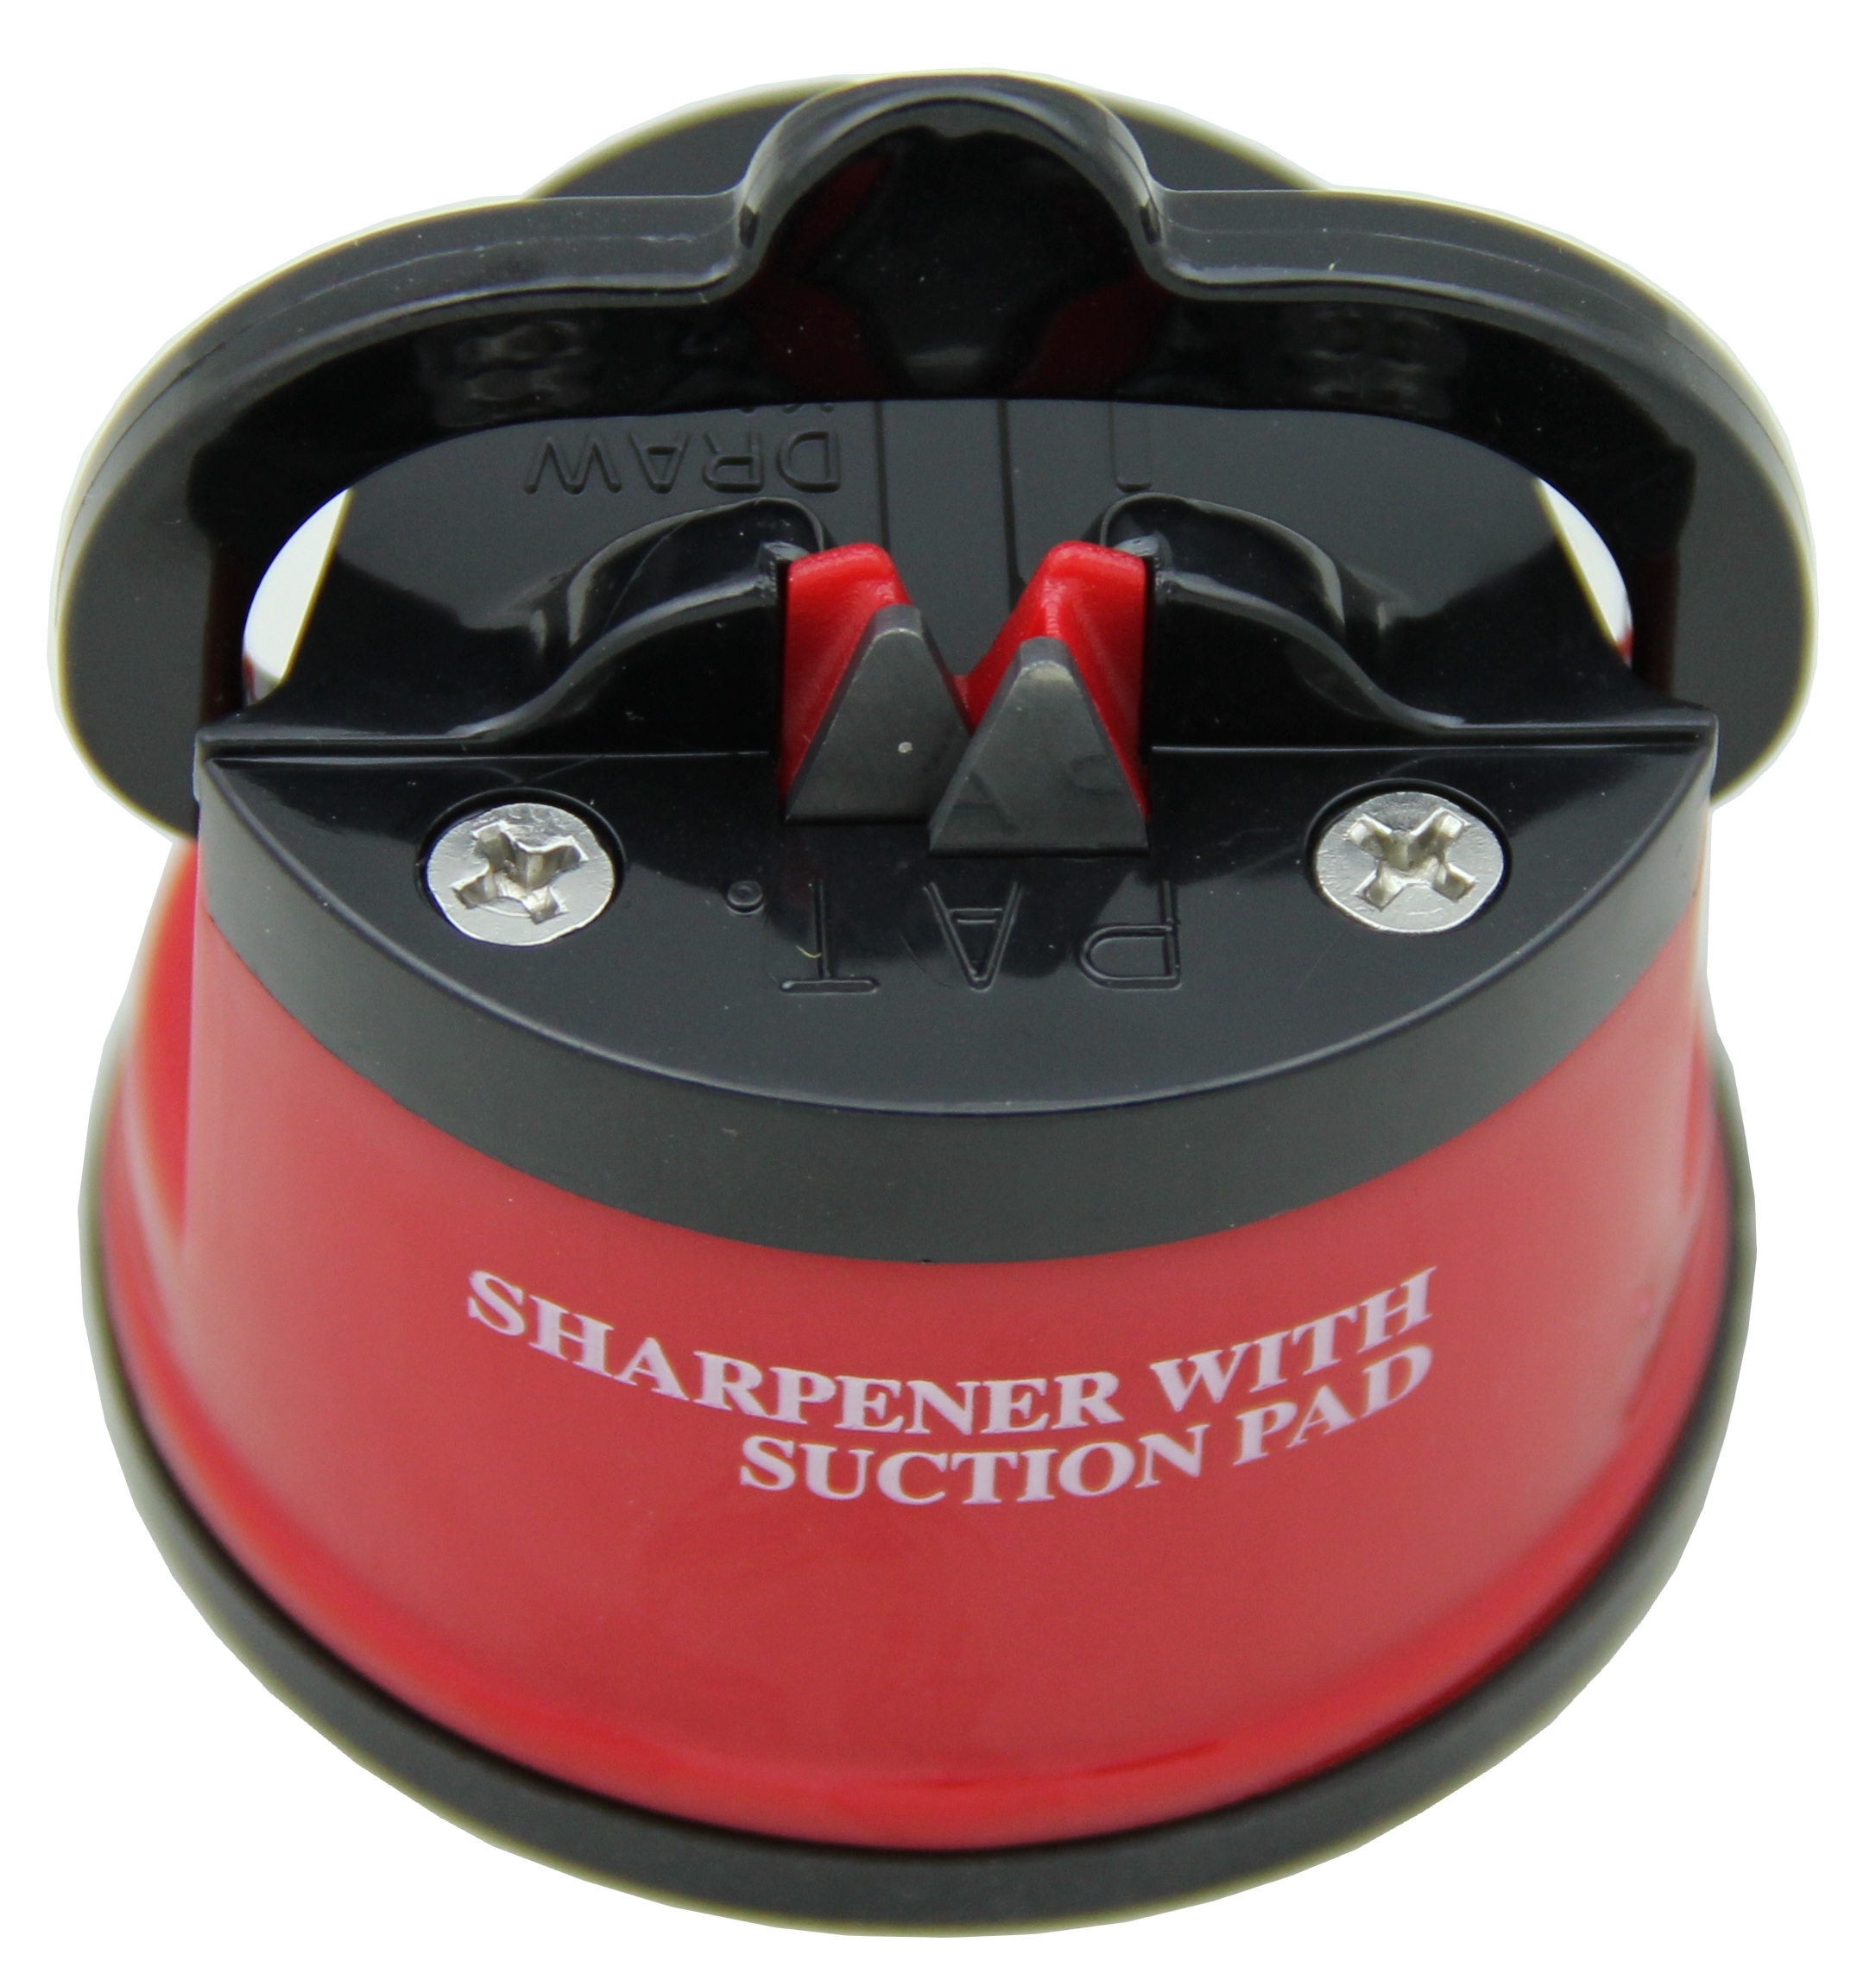 Knife Sharpener with Suction Pad (Sharpeners)